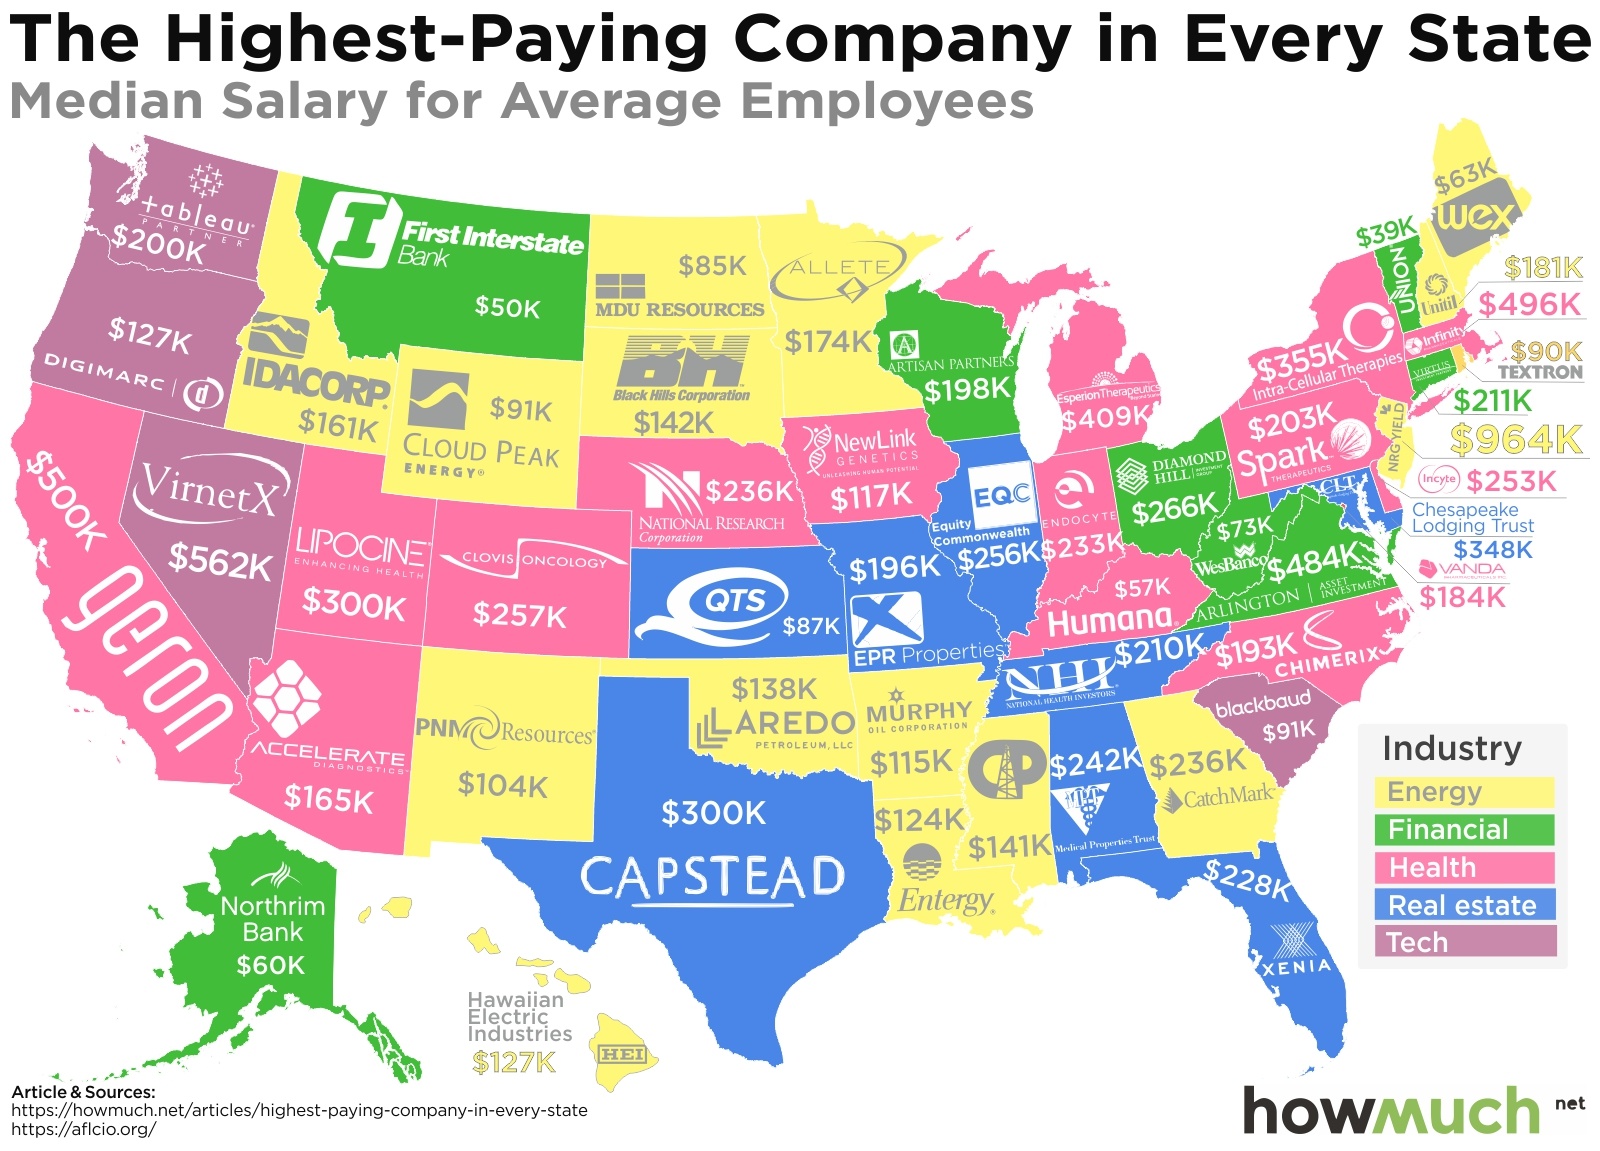 Highest Paying Companies in U.S.